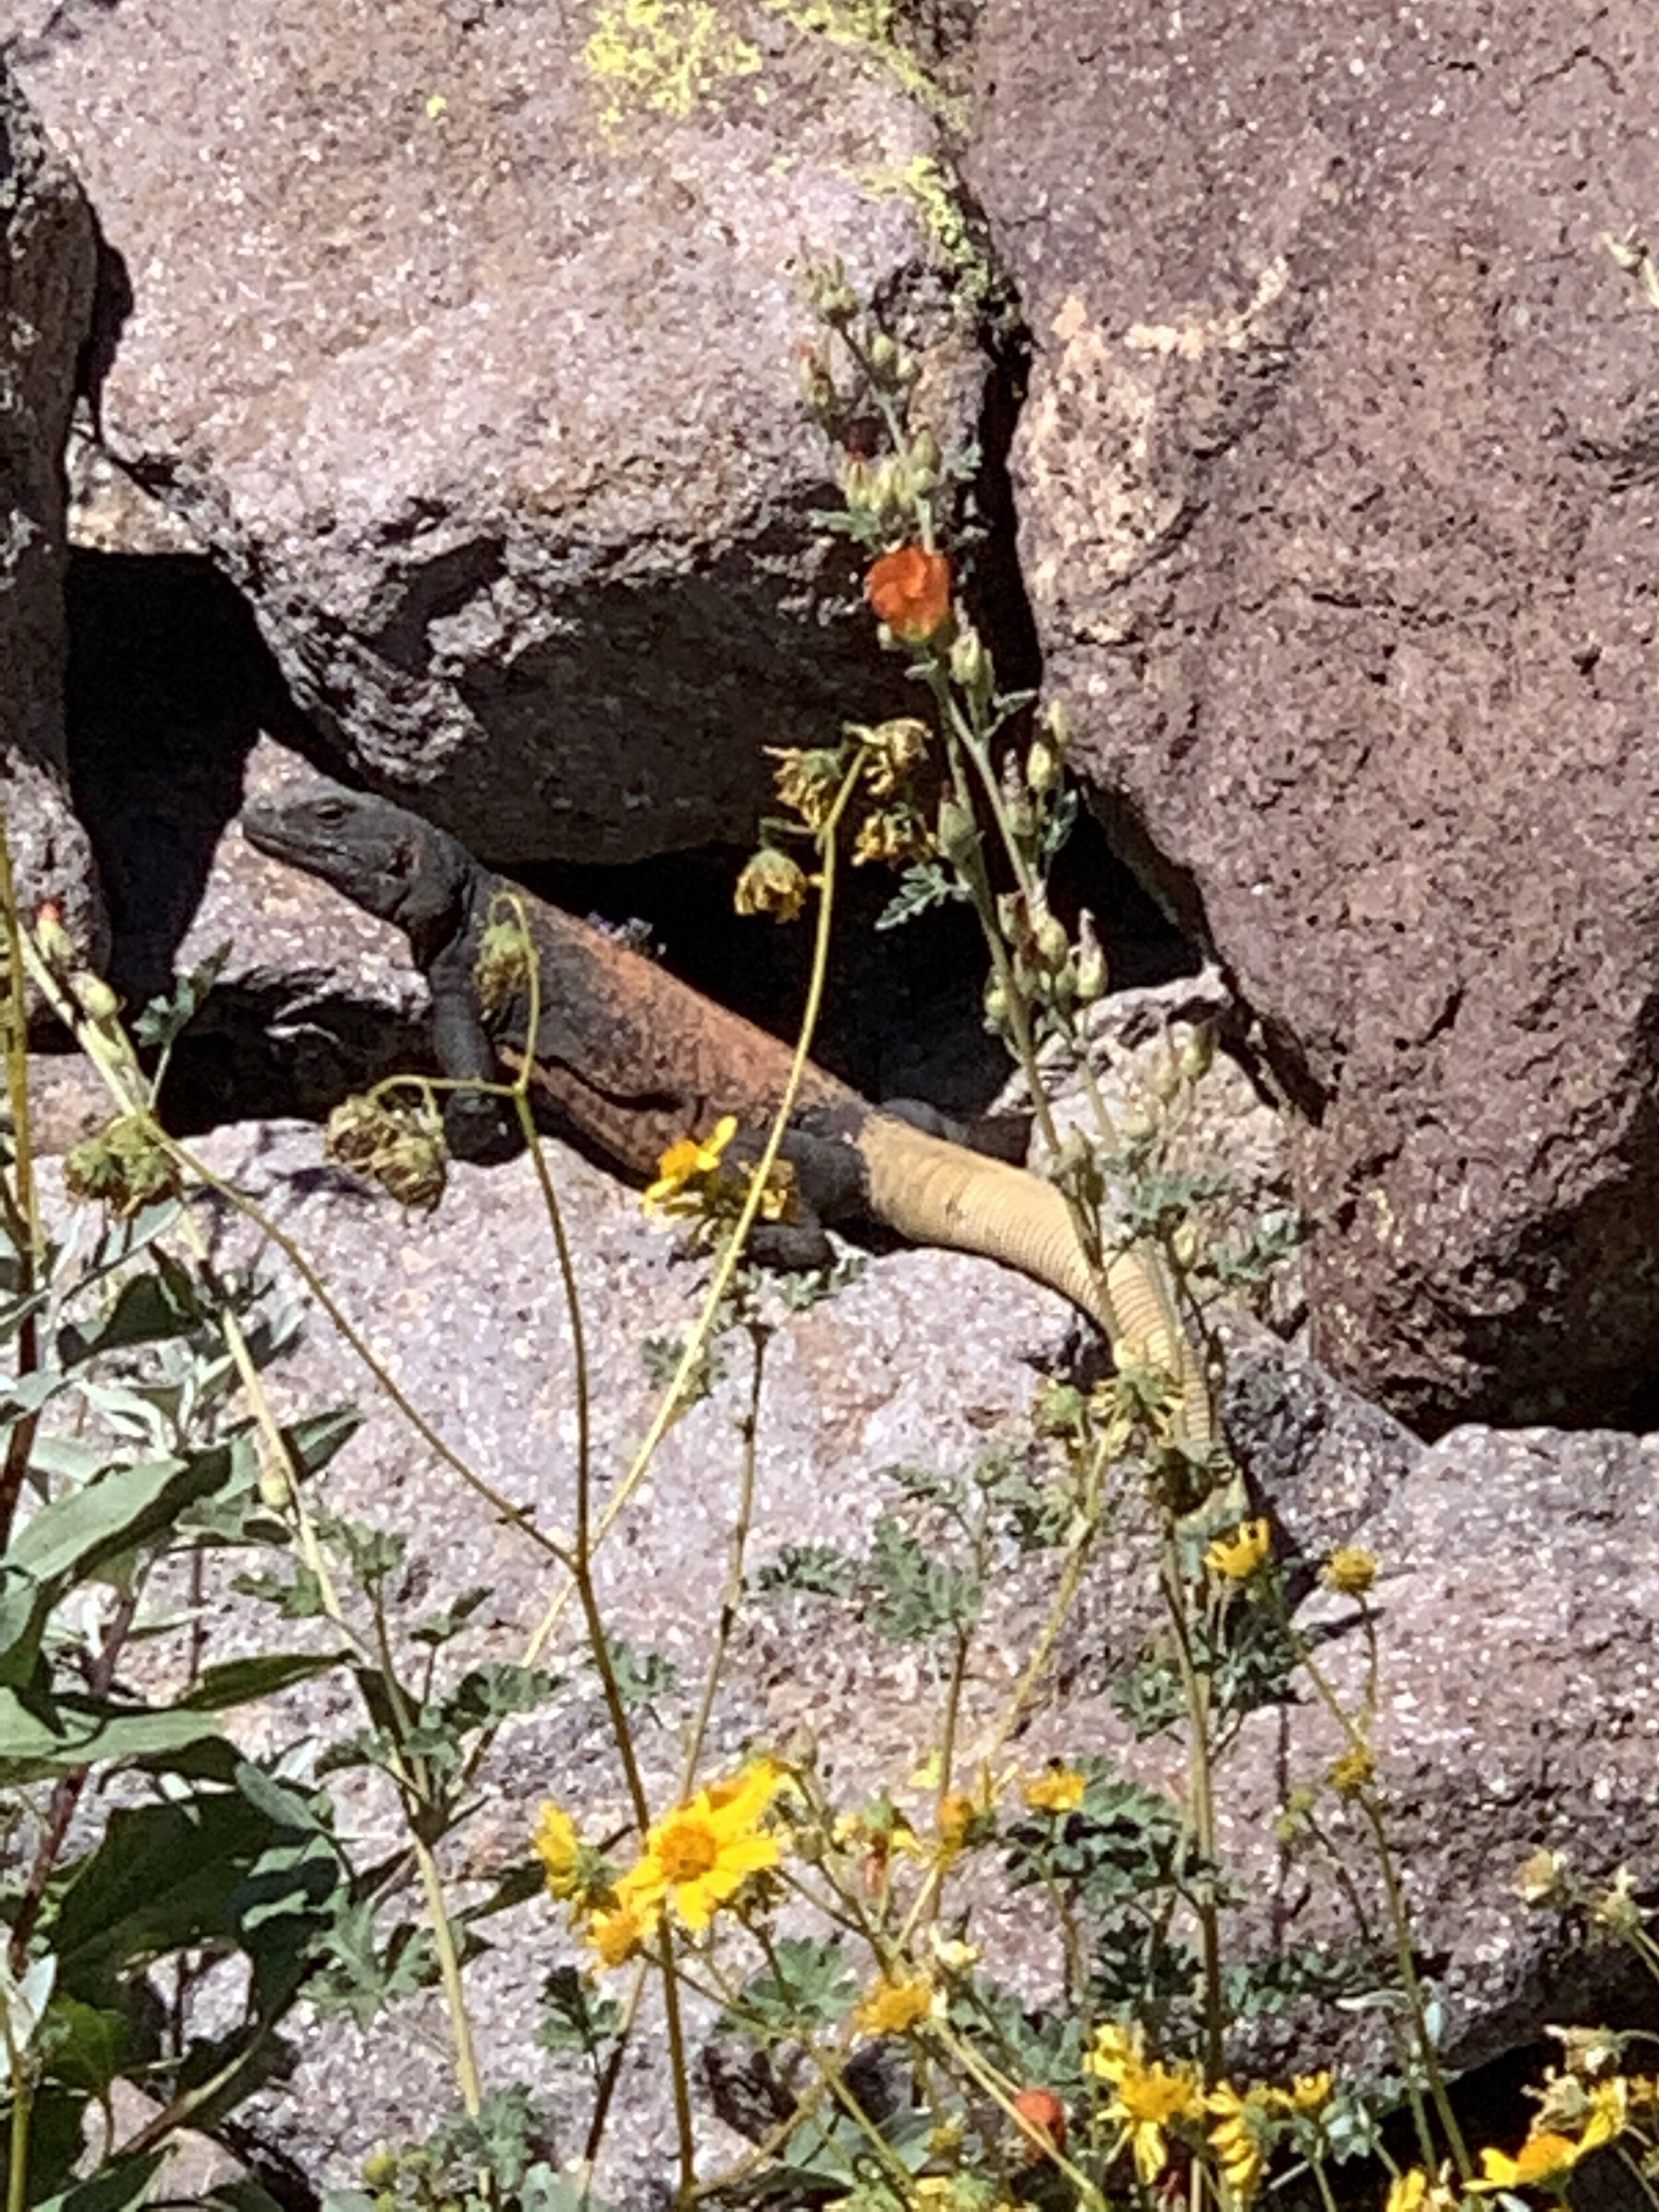  We were hoping to see something a little more interesting like a rattlesnake or Gila Monster but Glenda did spot this Chuckwalla on the way back from a hike. 